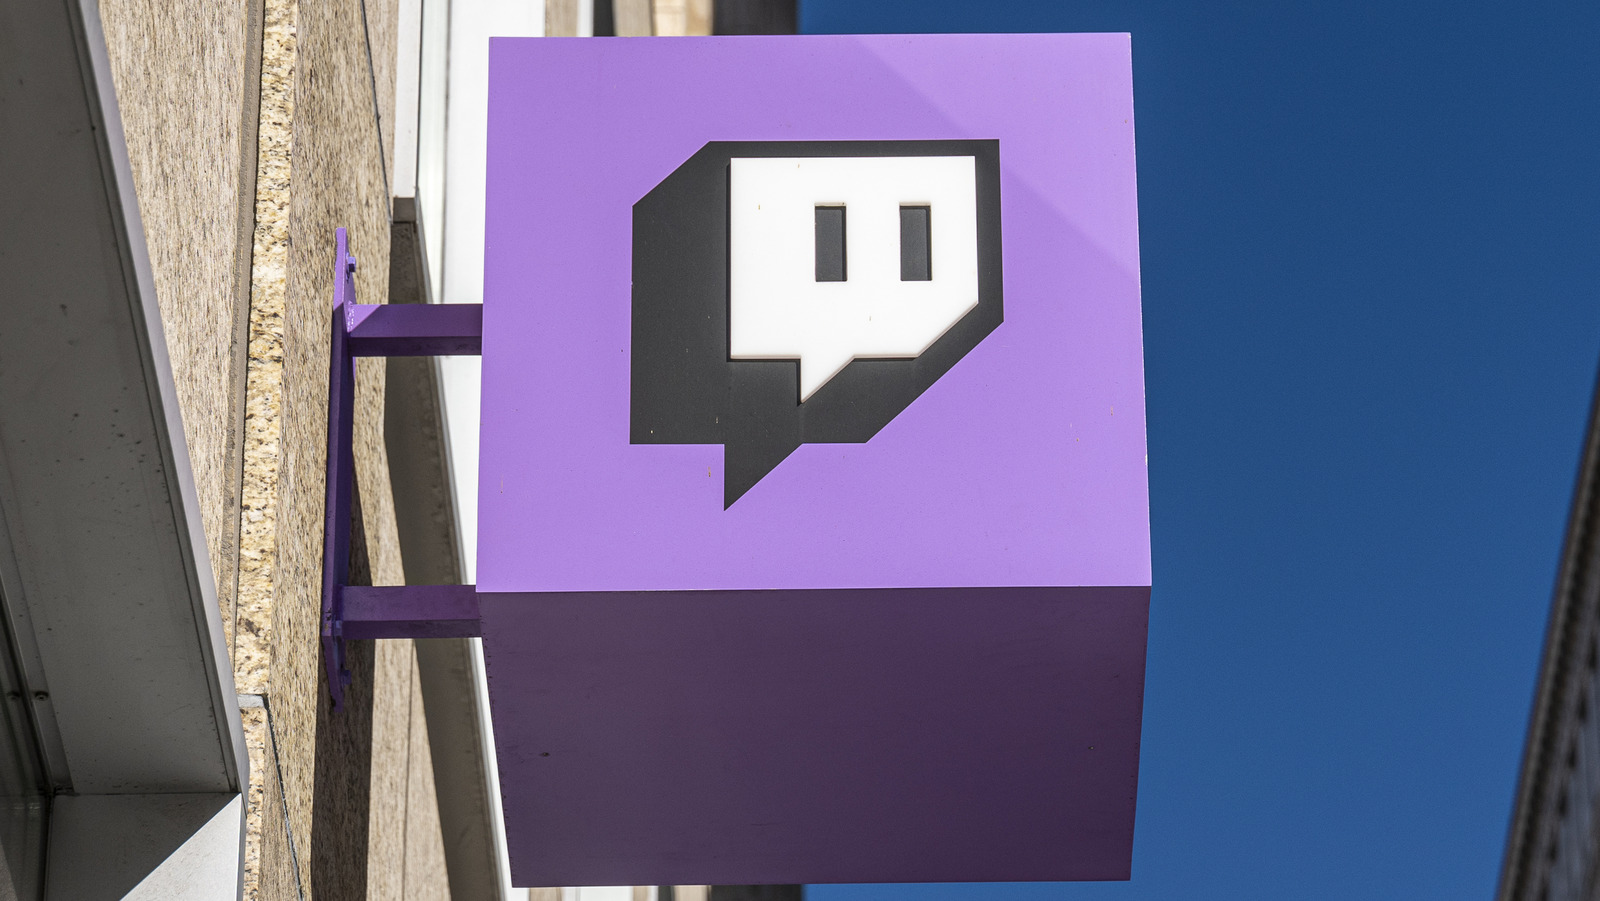 Twitch,  to Rebrand Twitch Prime – ARCHIVE - The Esports